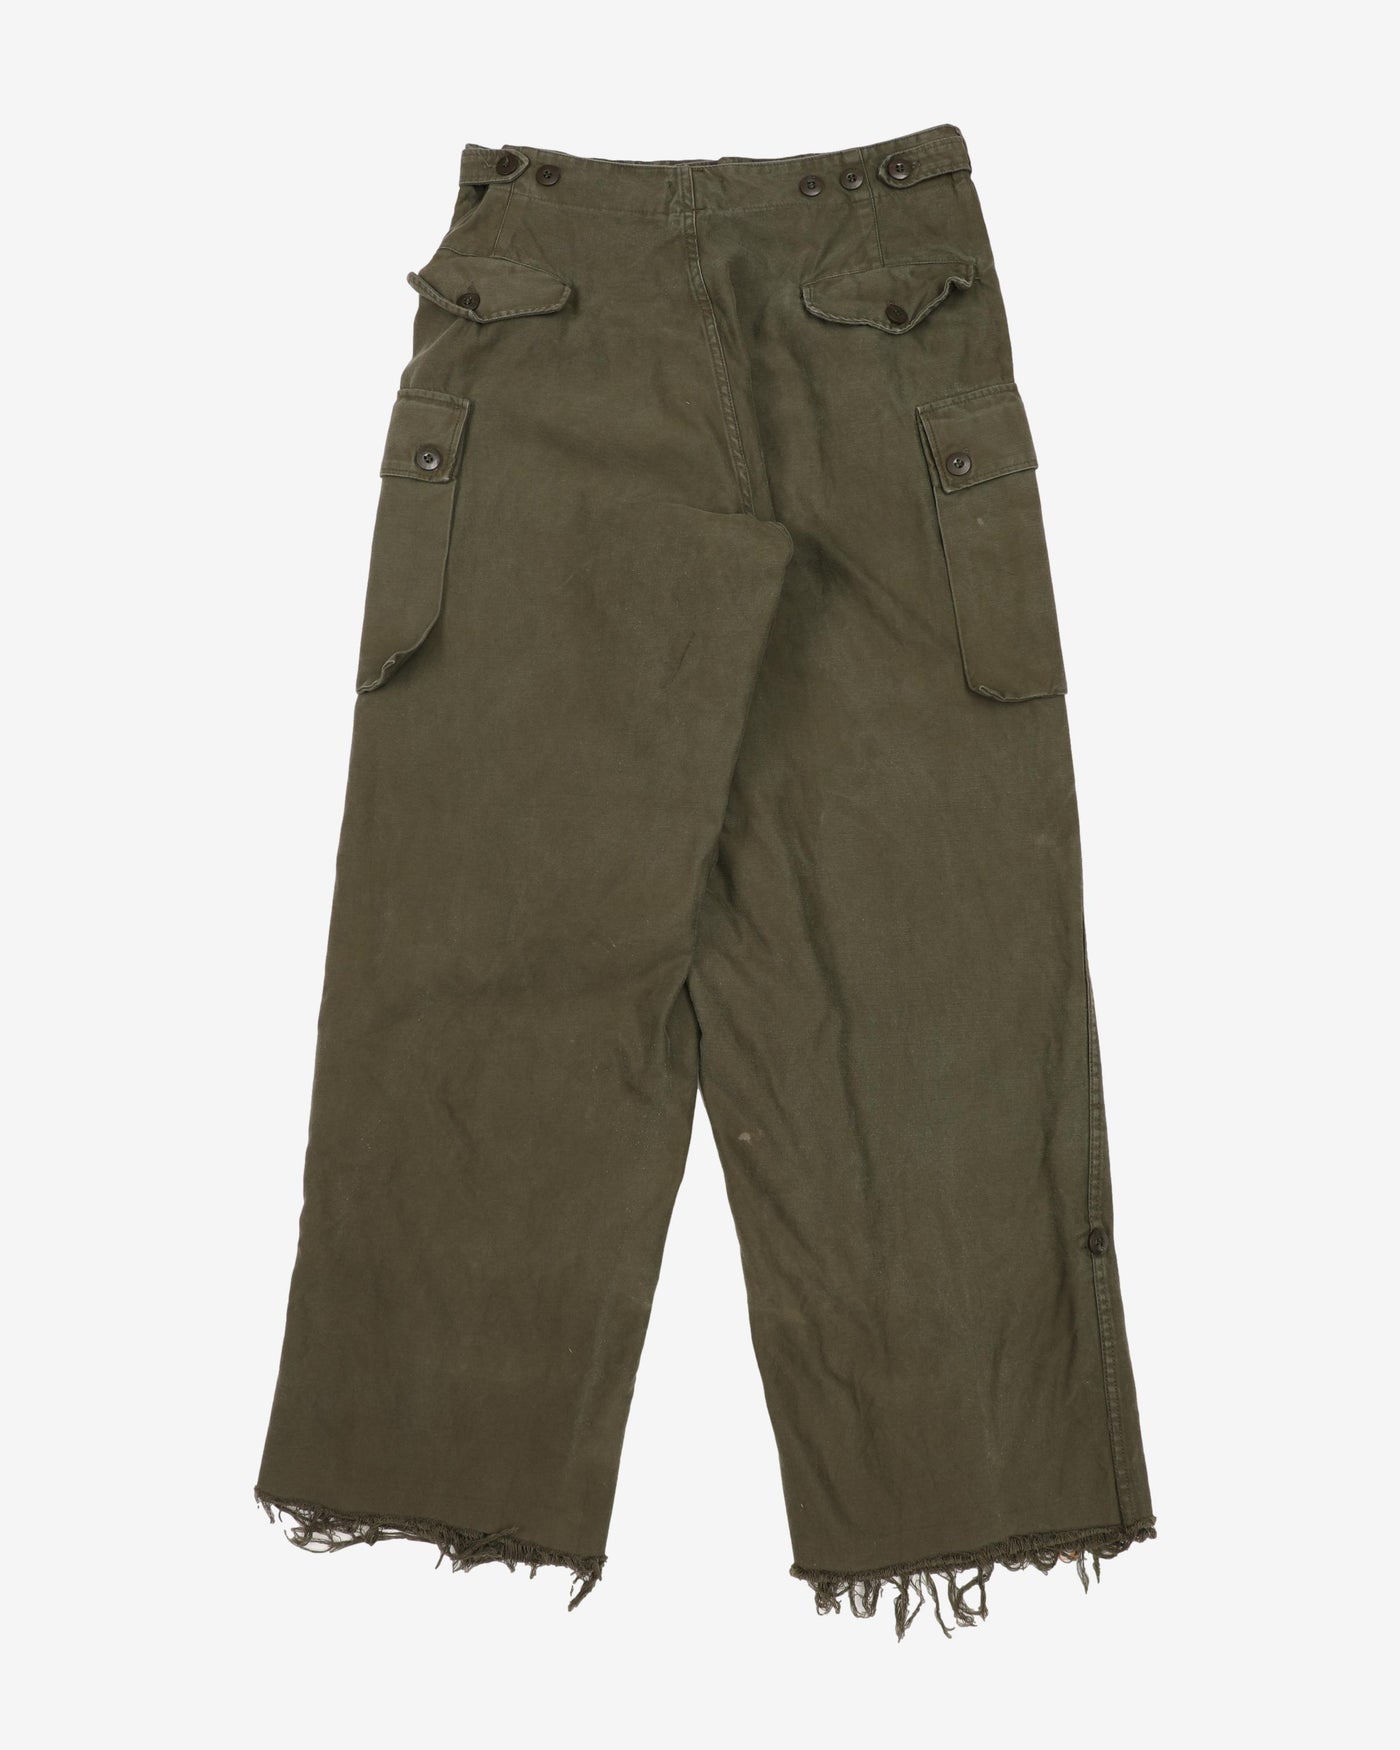 1960s Vintage Dutch Army Cold Weather Combat Trousers - 32x34